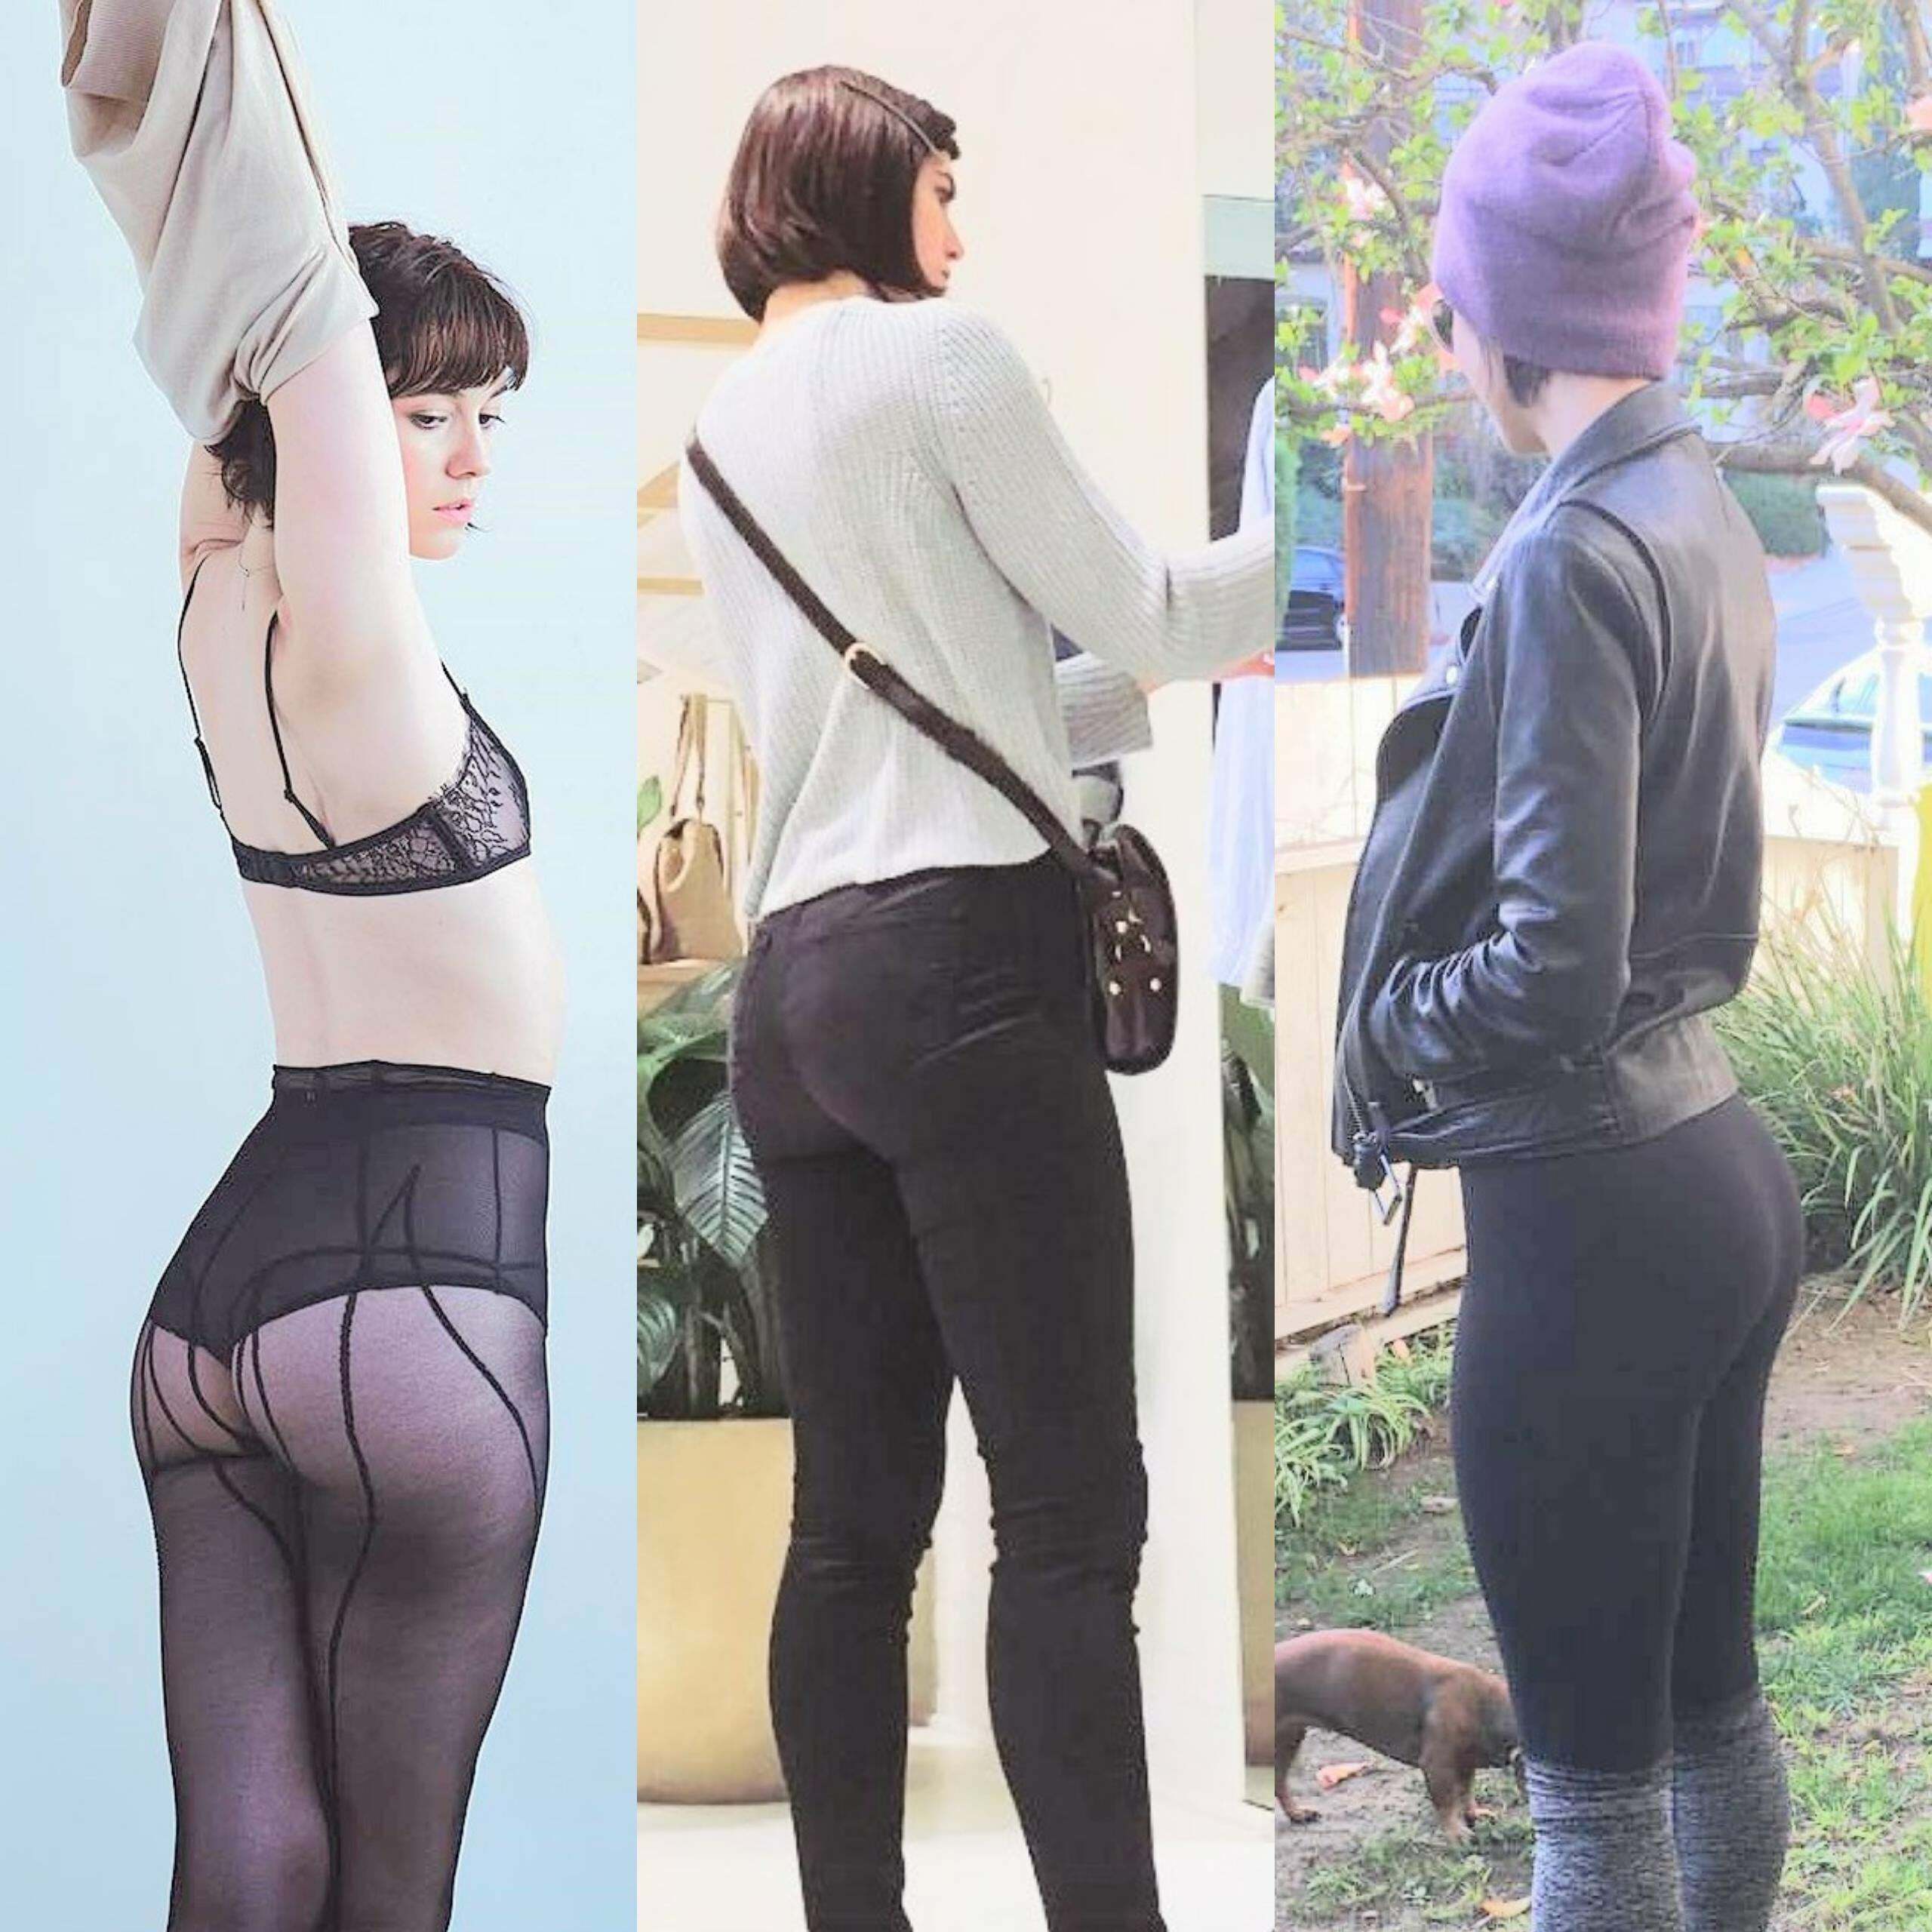 Obsessed with Mary Elizabeth Winstead and her ass